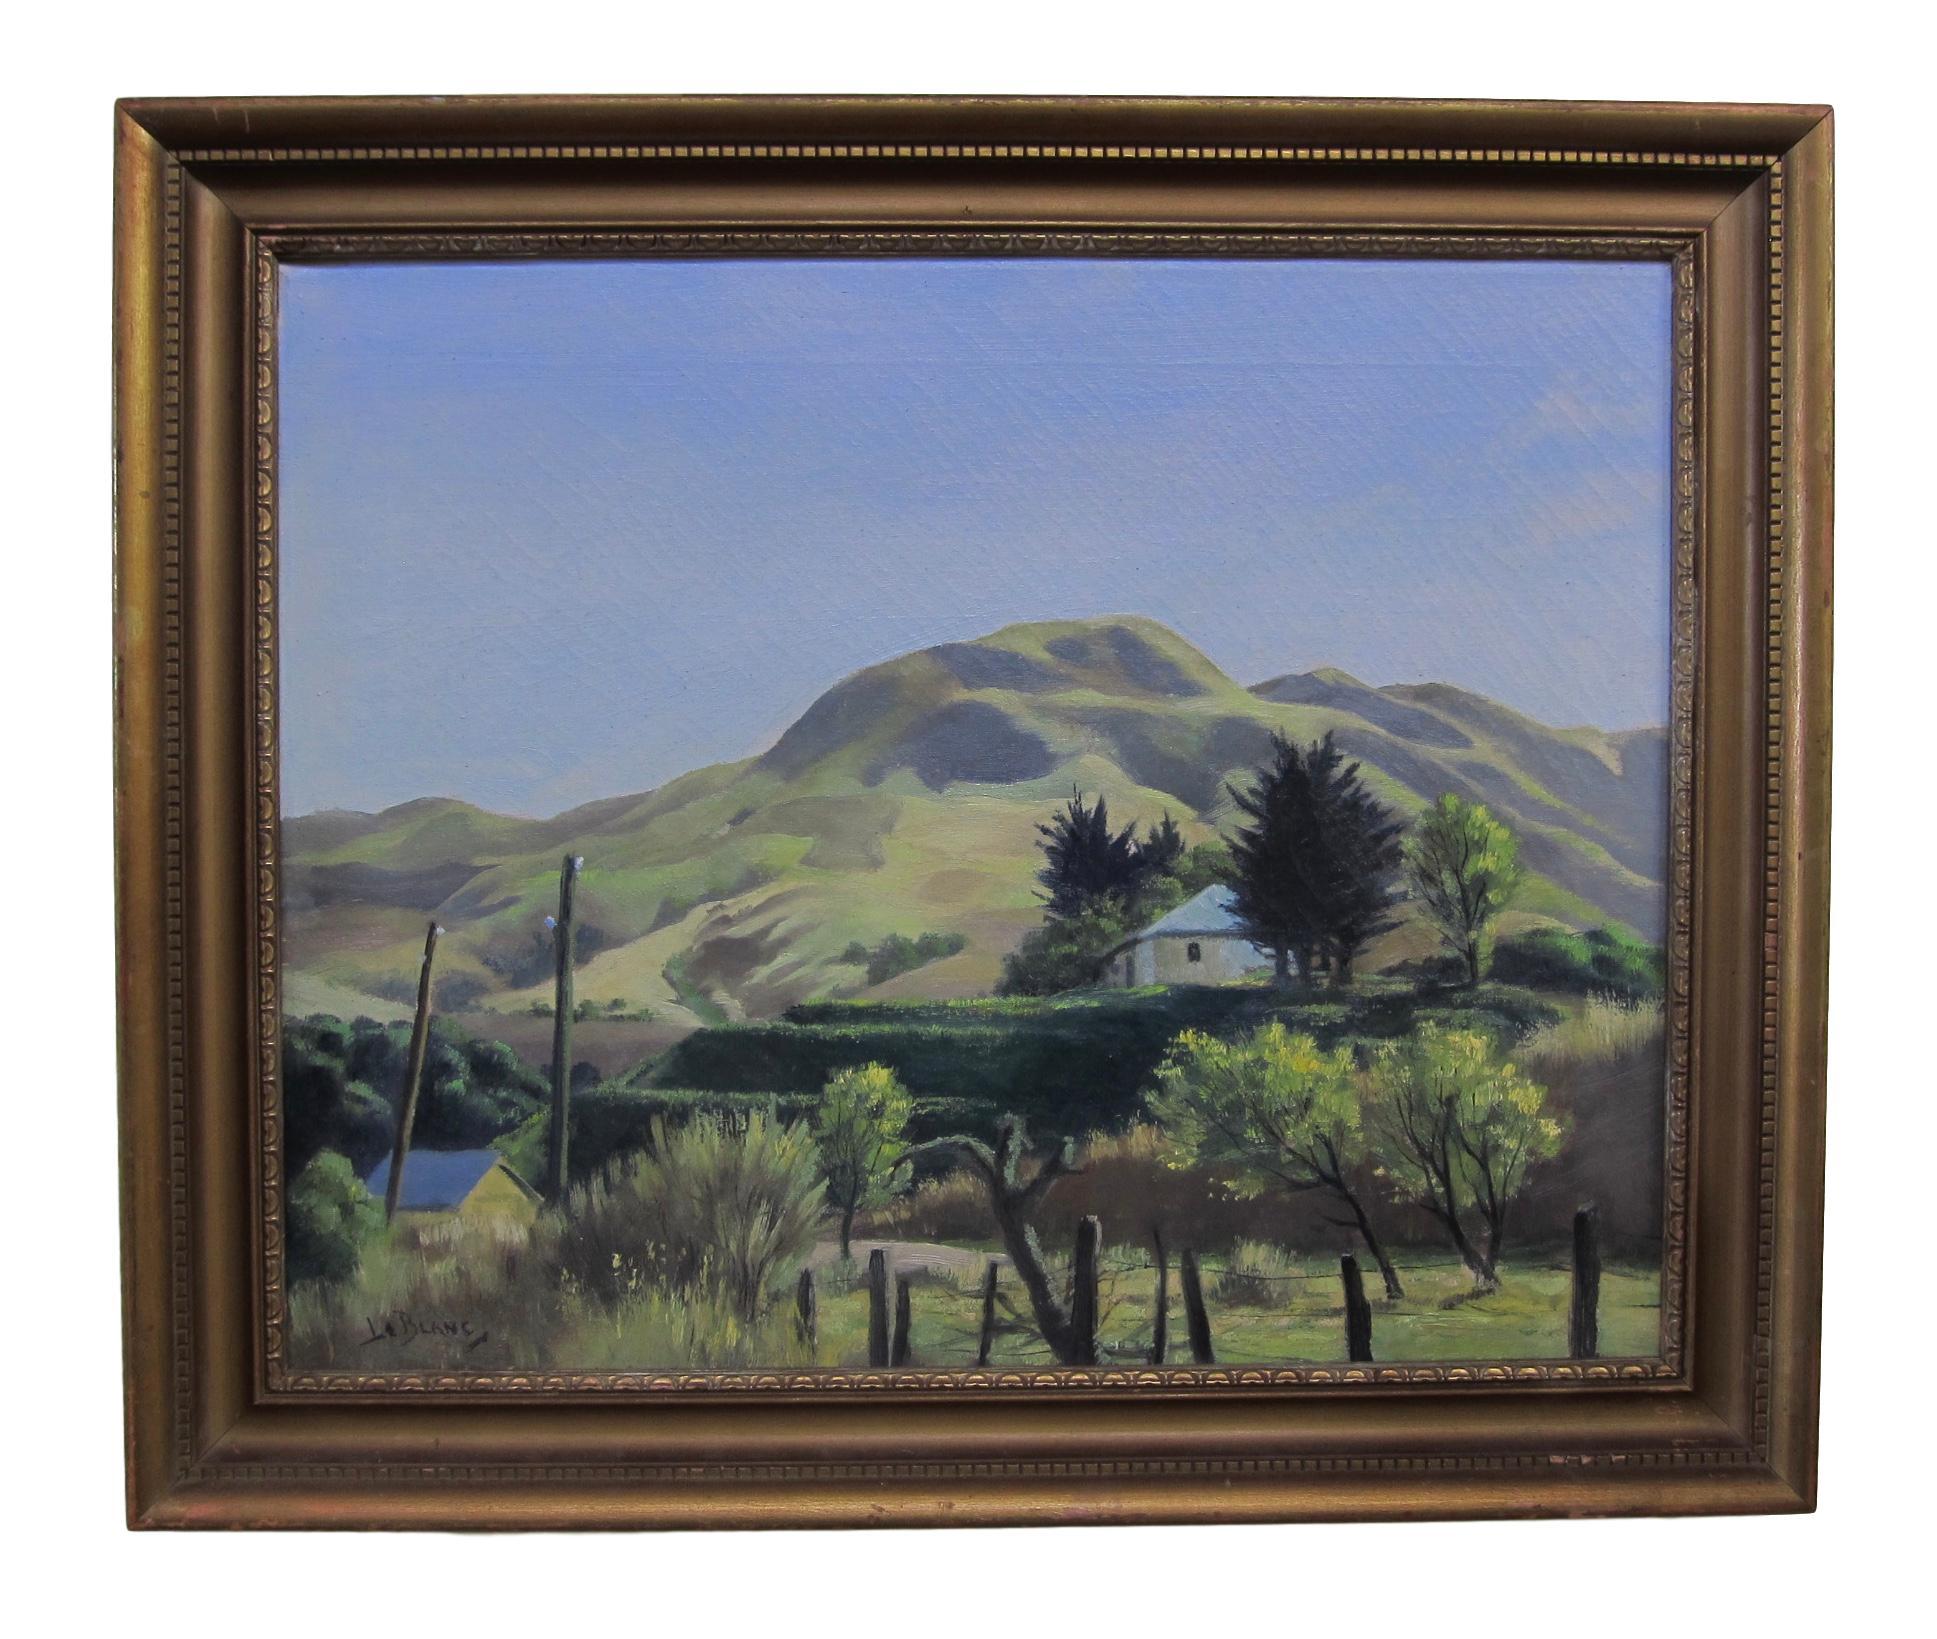 California landscape painting with warm and bright, sunlit hills by artist Lee LeBlanc.
About the artist:  Lee LeBlanc (1913-1988), was a California artist who worked in both southern and northern California, including working at Disney Studios,